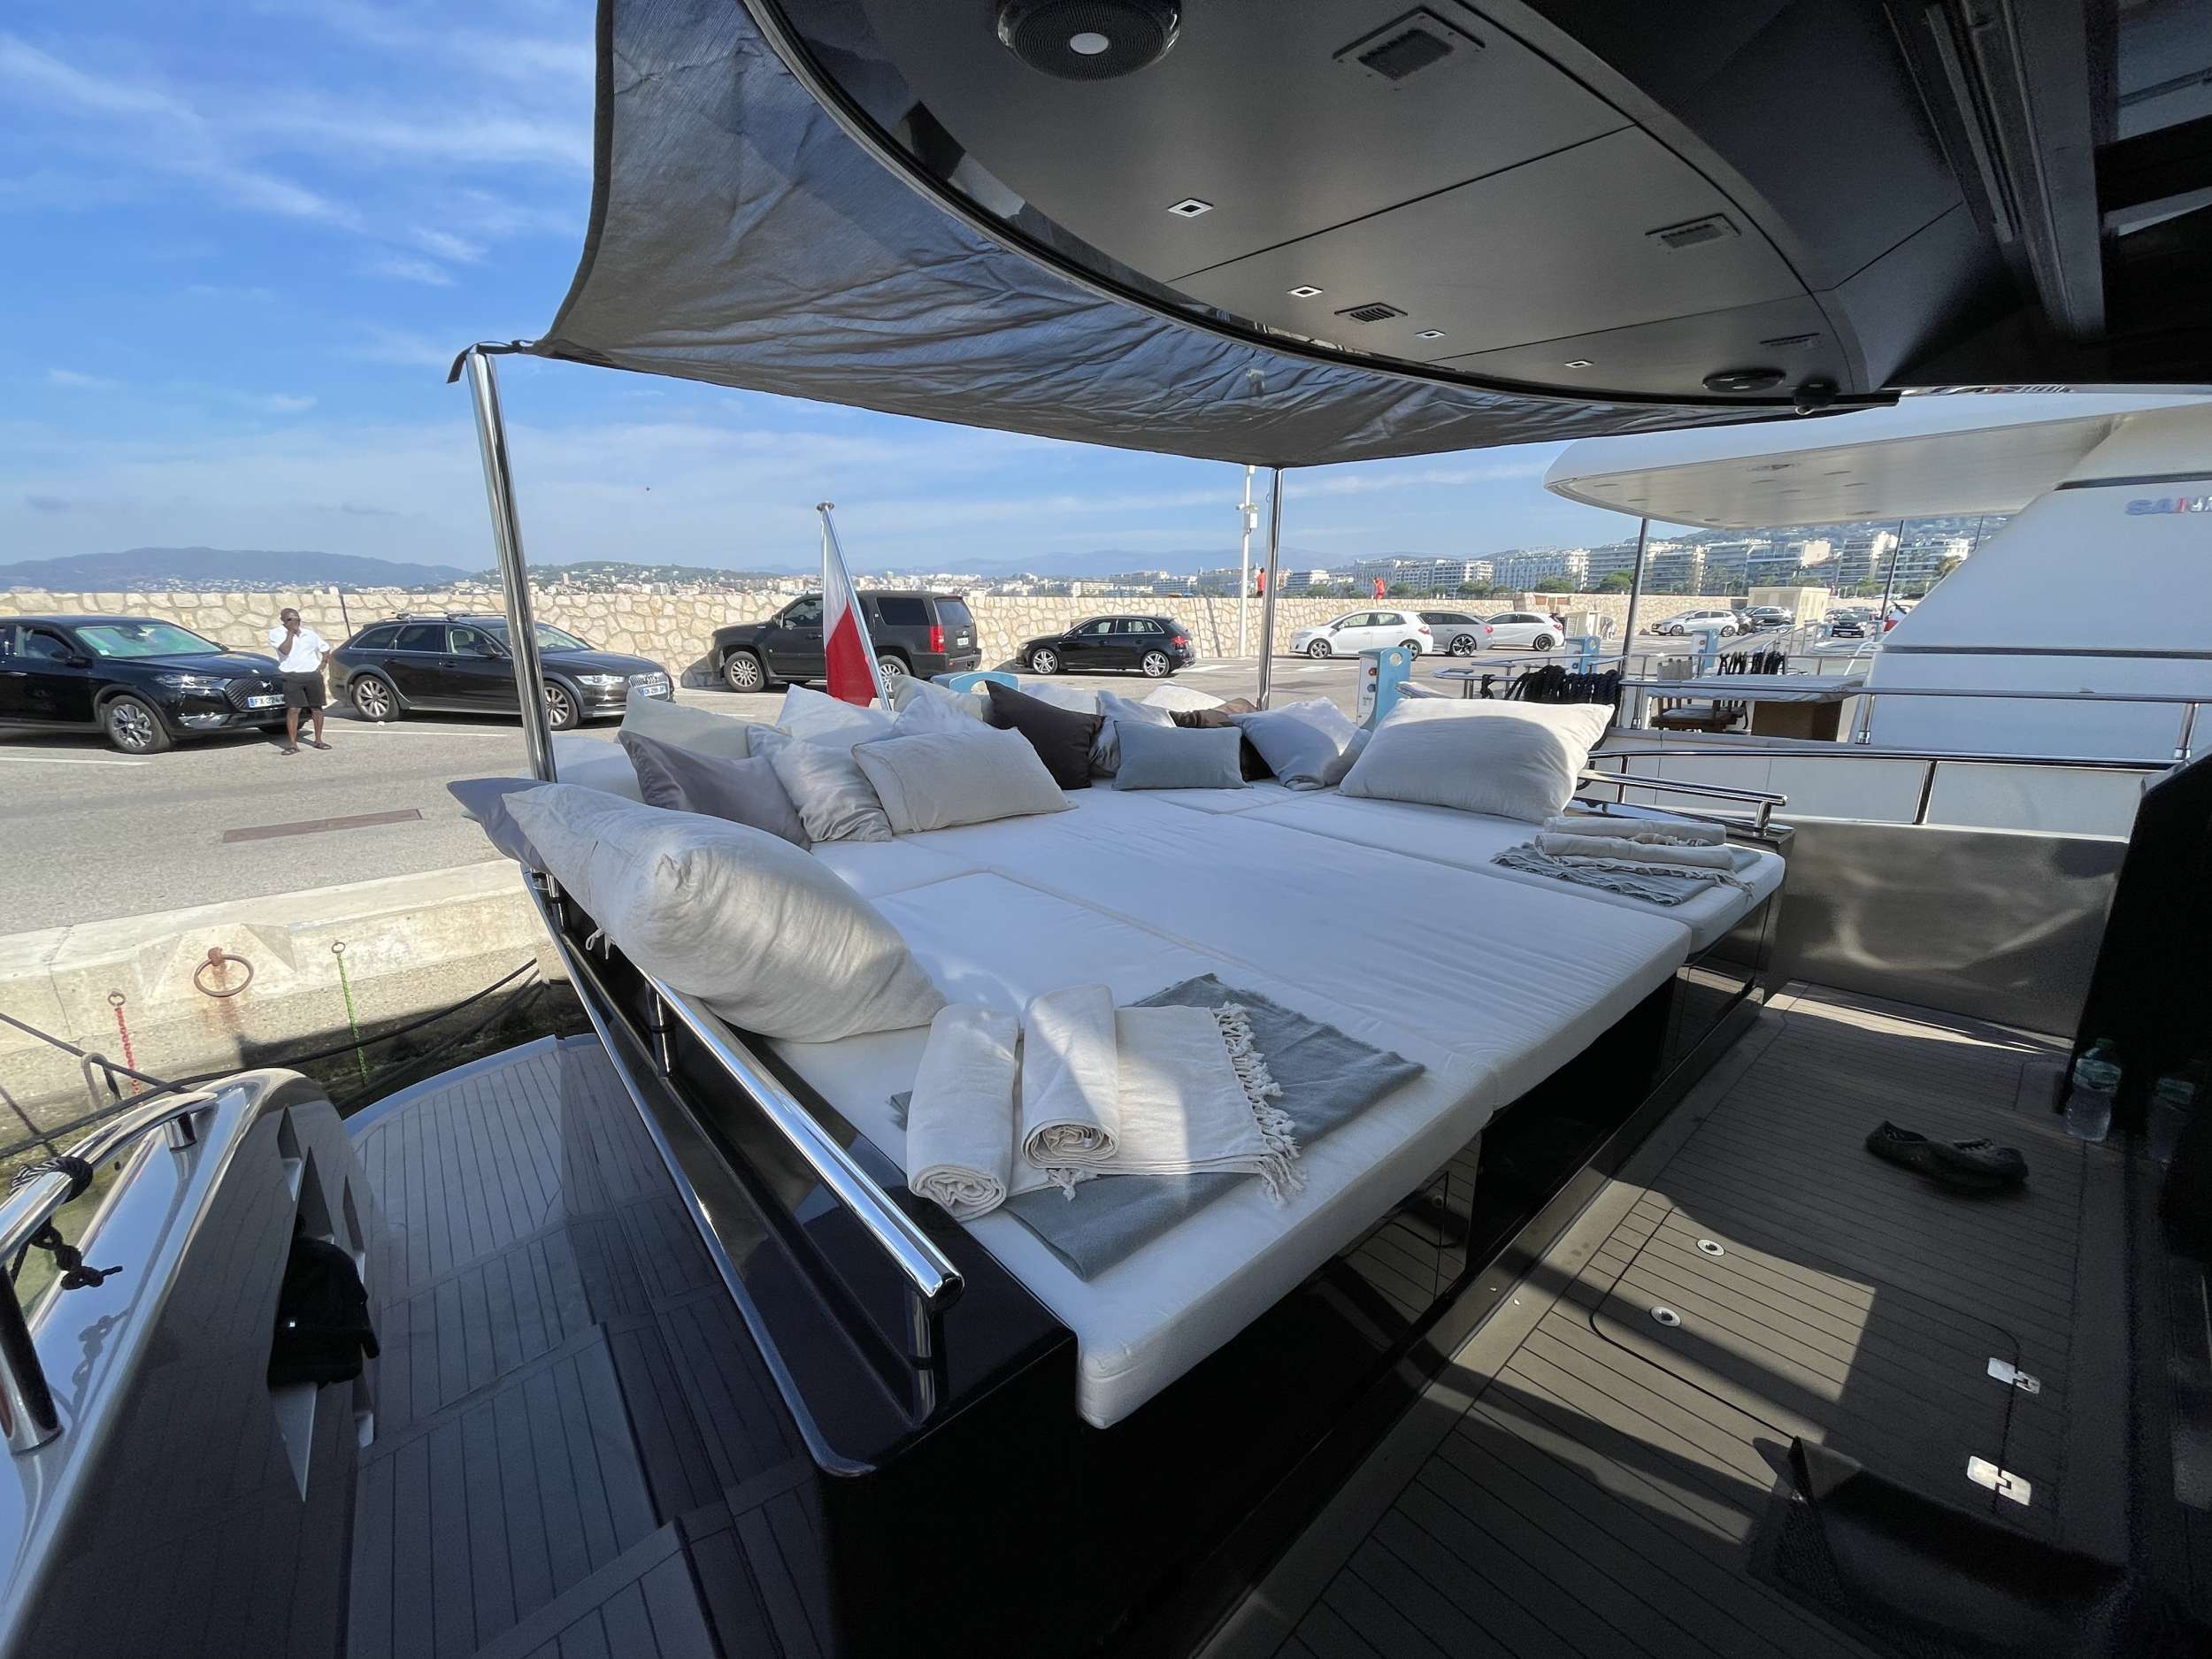 TOMMY I - Yacht Charter Beaulieu-sur-Mer & Boat hire in Fr. Riviera, Corsica & Sardinia 4